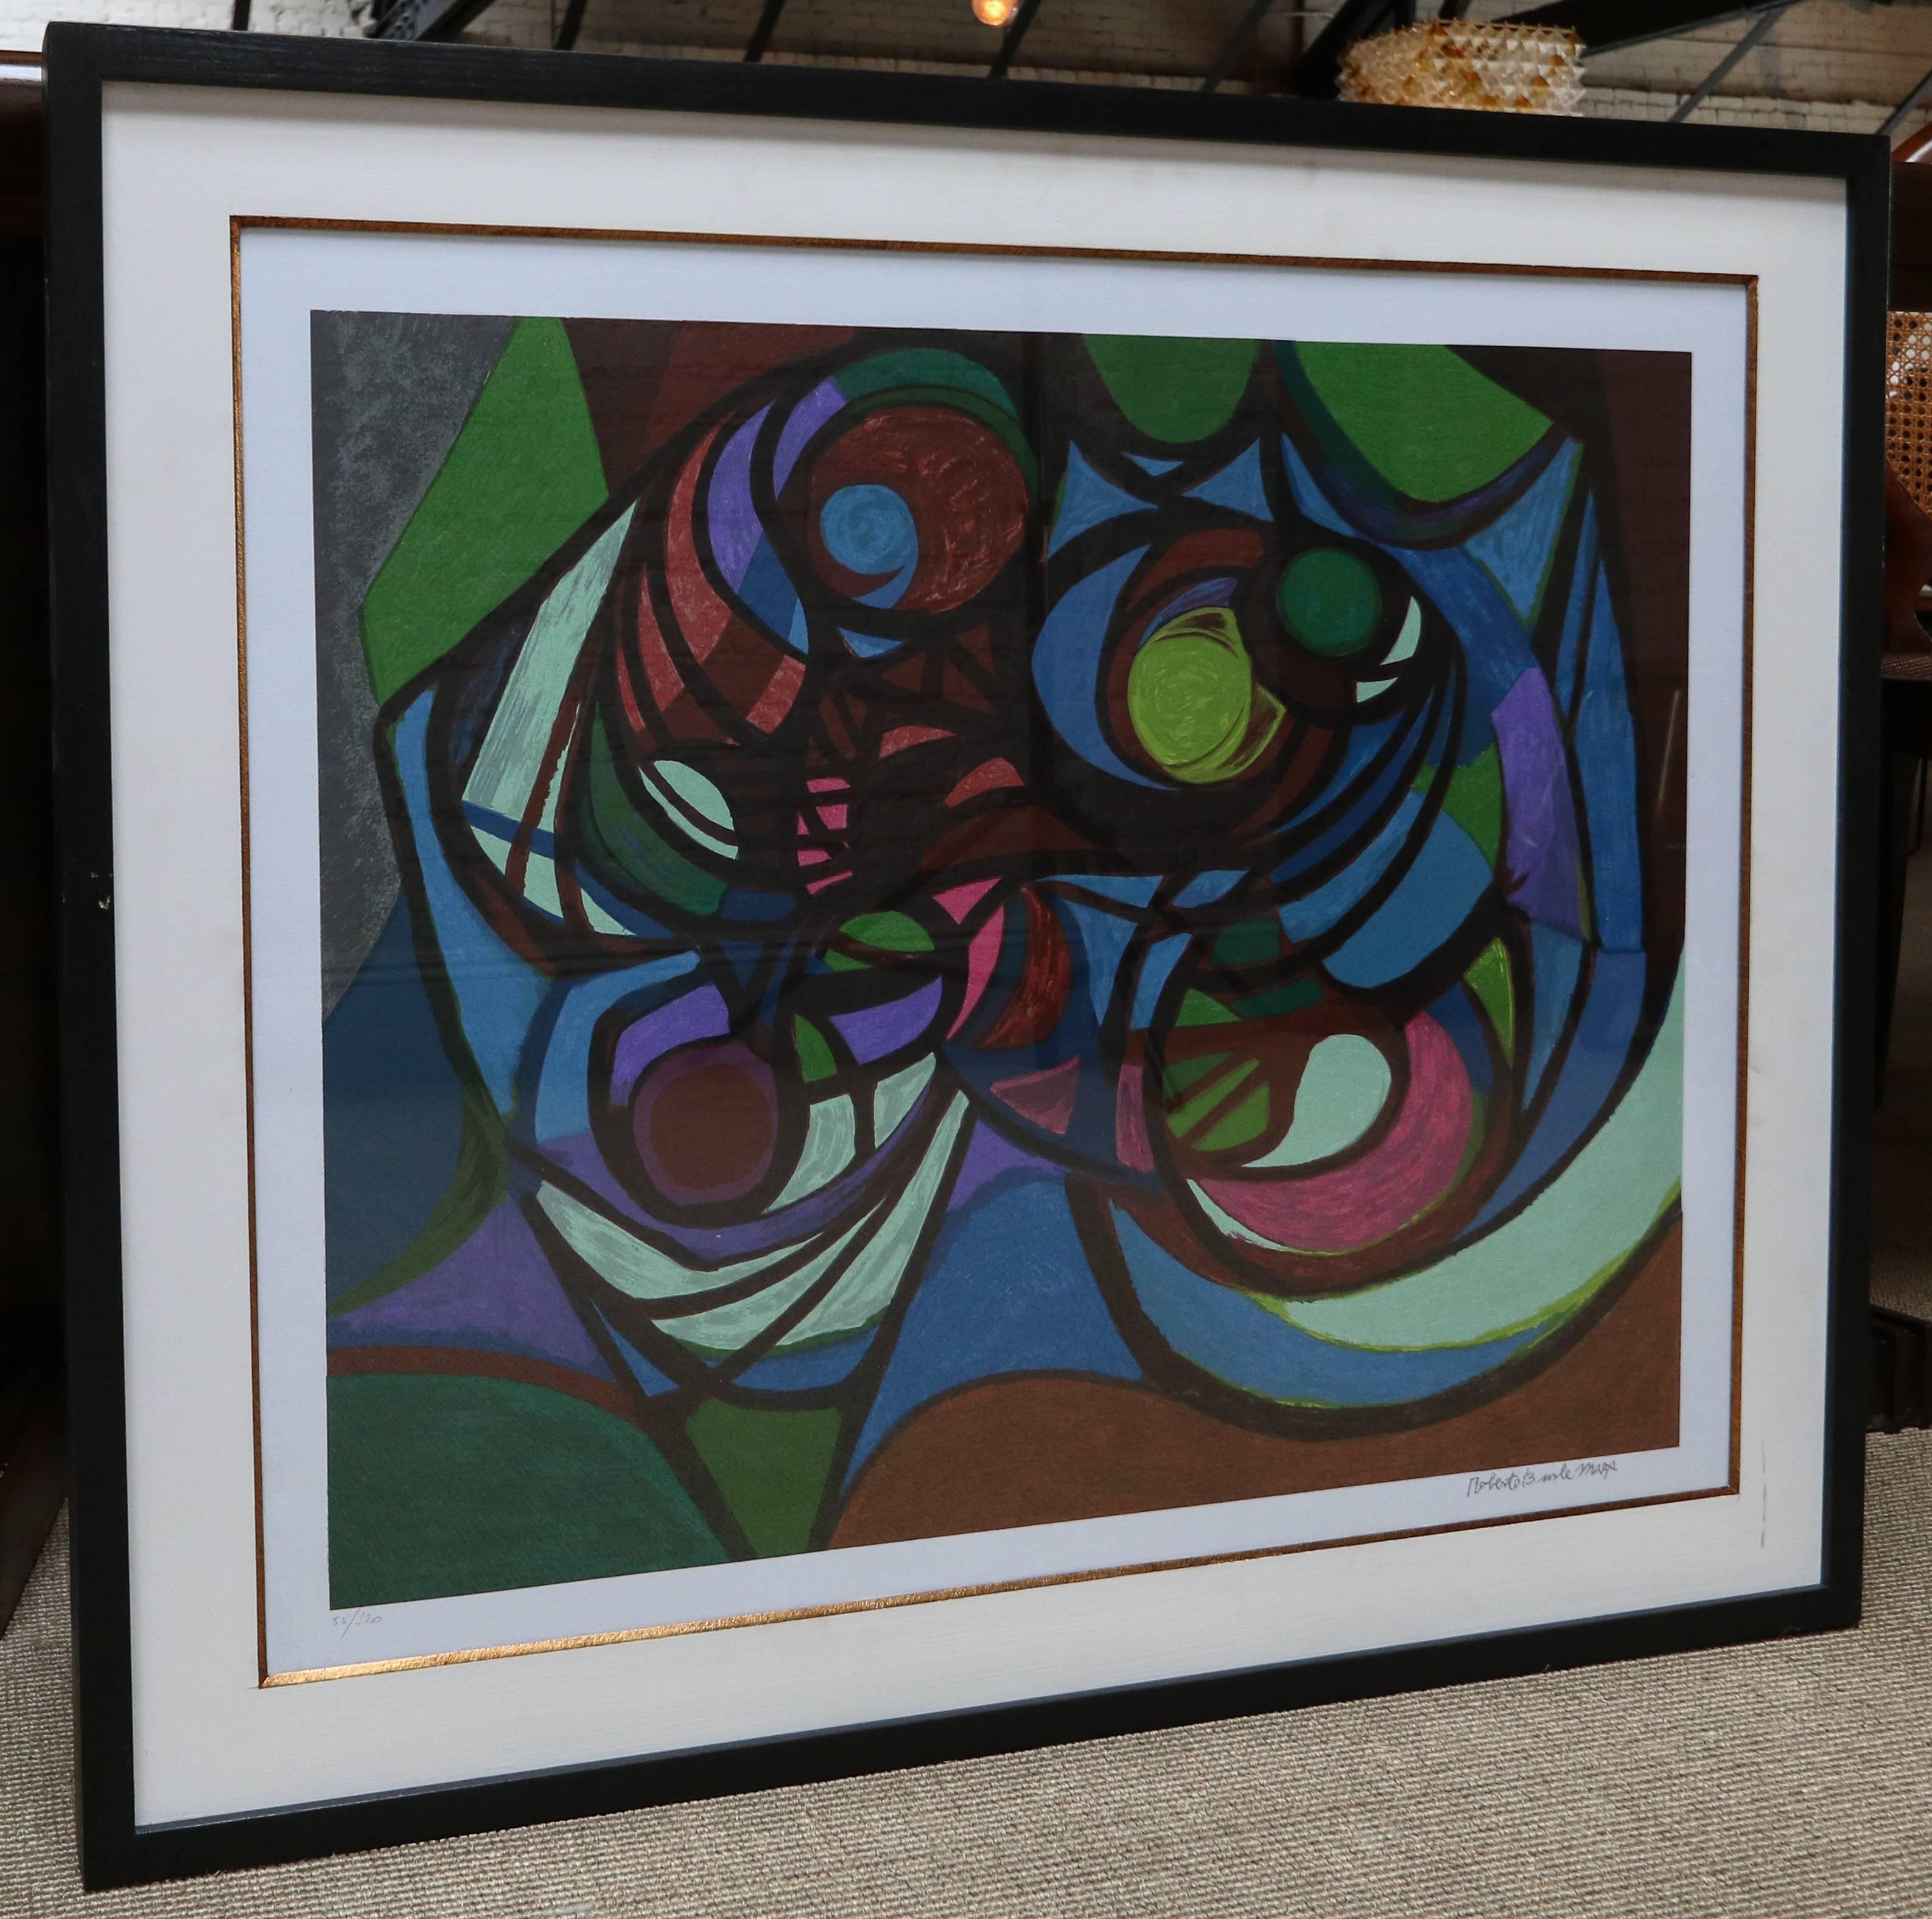 Roberto Burle Marx abstract print in greens and blues. Number 56/120.